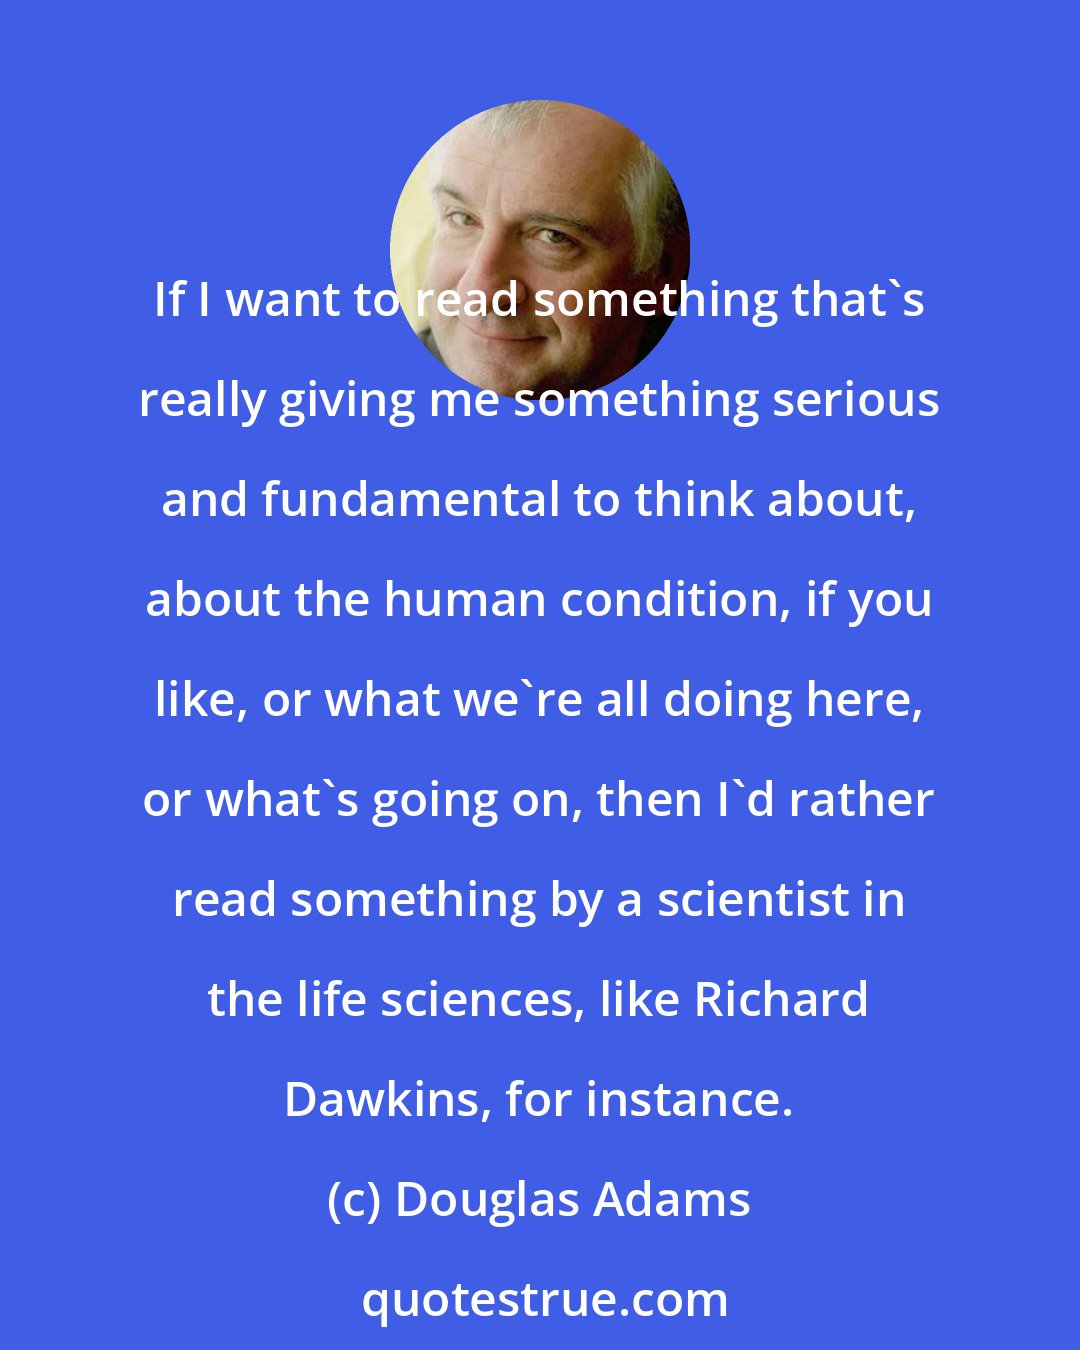 Douglas Adams: If I want to read something that's really giving me something serious and fundamental to think about, about the human condition, if you like, or what we're all doing here, or what's going on, then I'd rather read something by a scientist in the life sciences, like Richard Dawkins, for instance.